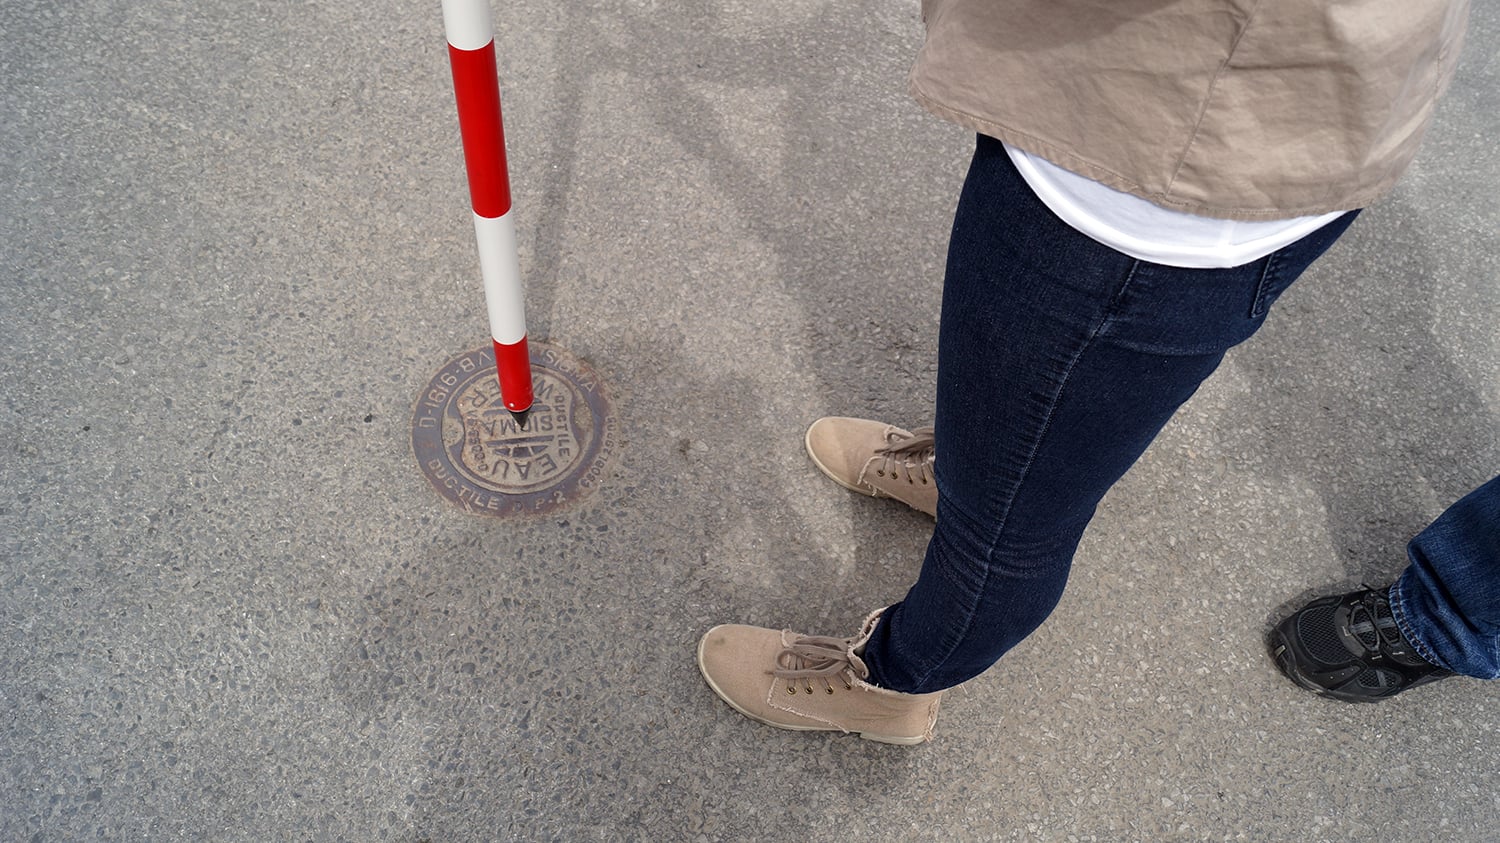 Industry Water - Mapping Manhole with Eos Arrow GNSS Rangepole Setup